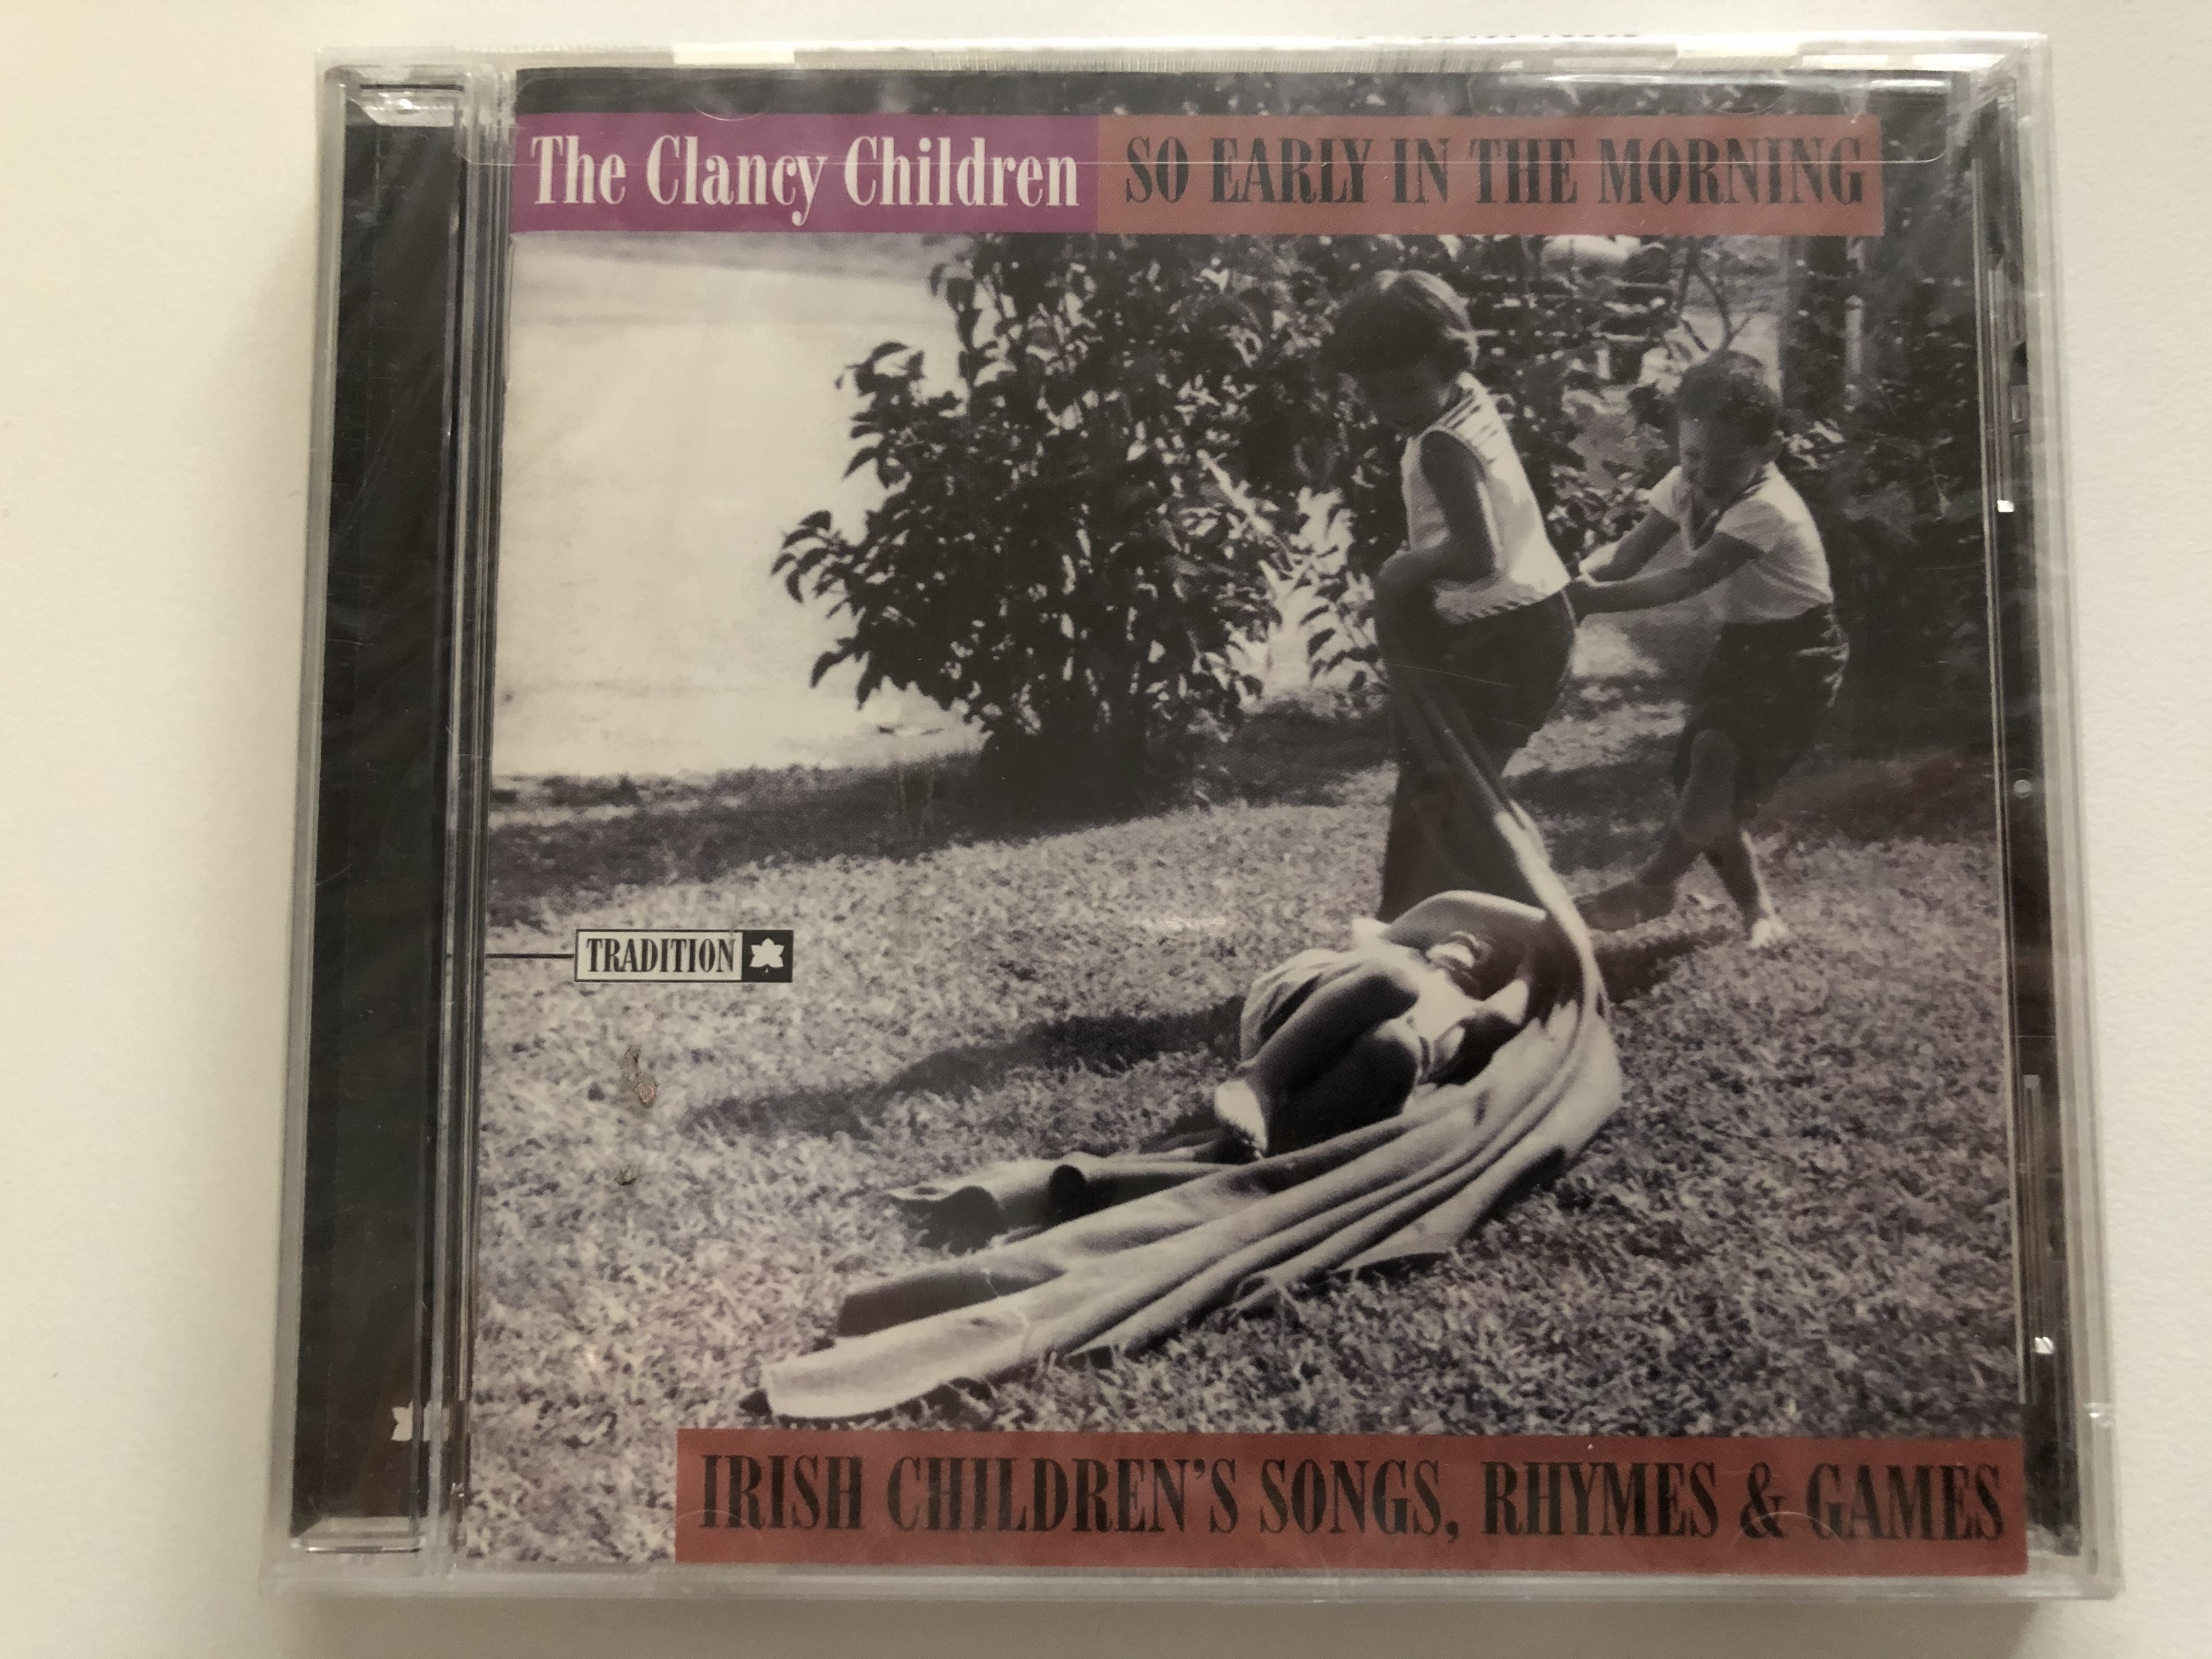 the-clancy-children-so-early-in-the-morning-irish-children-s-songs-rhymes-games-tradition-audio-cd-1997-tcd-1053-1-.jpg